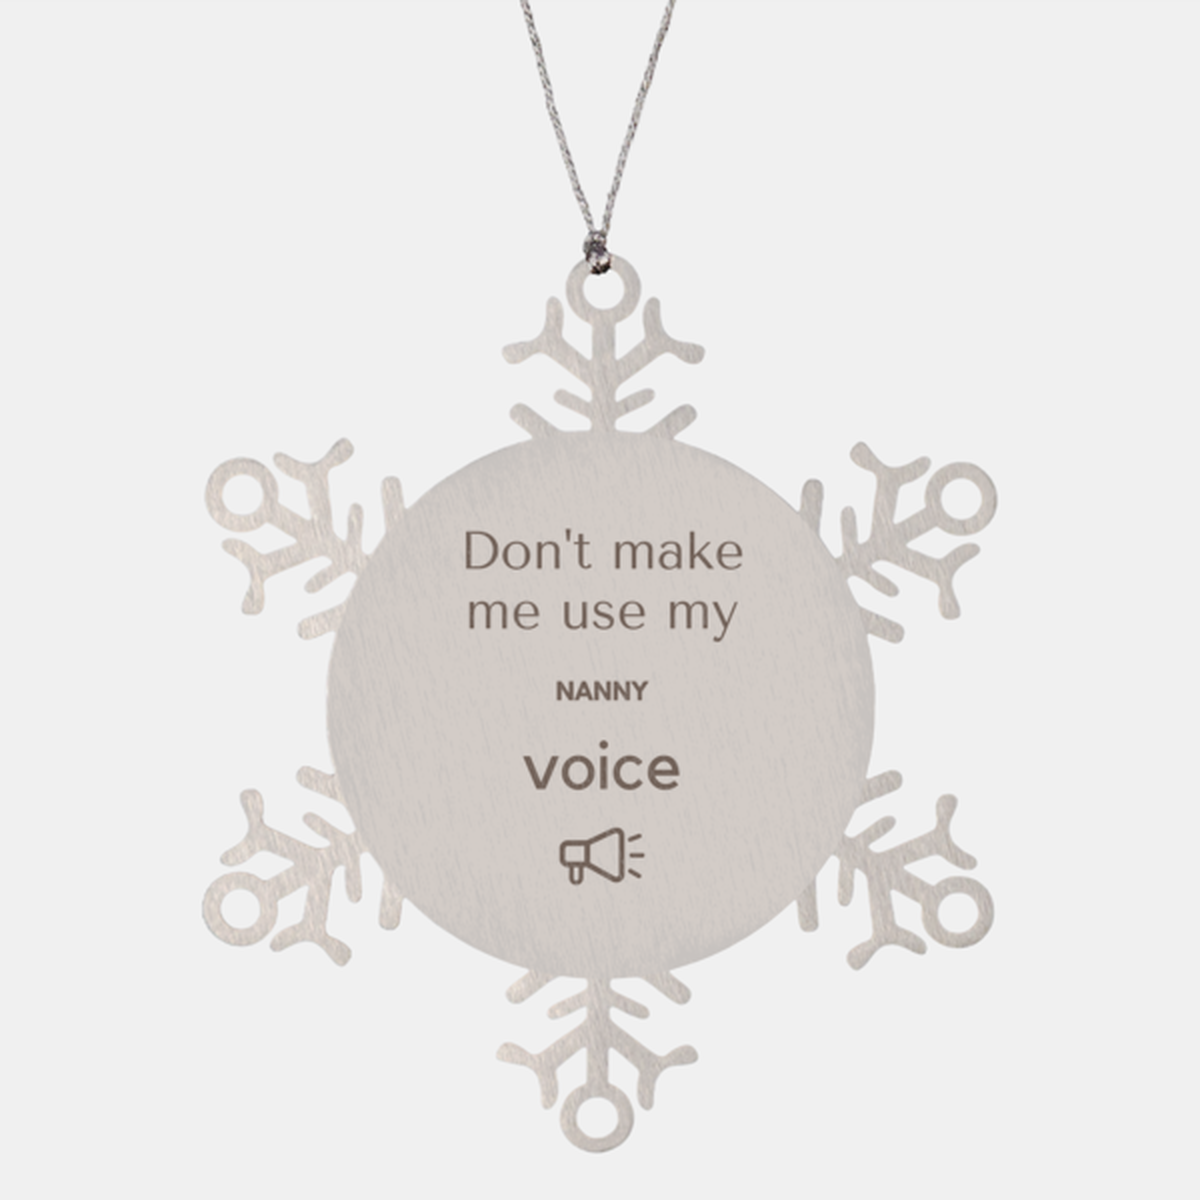 Don't make me use my Nanny voice, Sarcasm Nanny Ornament Gifts, Christmas Nanny Snowflake Ornament Unique Gifts For Nanny Coworkers, Men, Women, Colleague, Friends